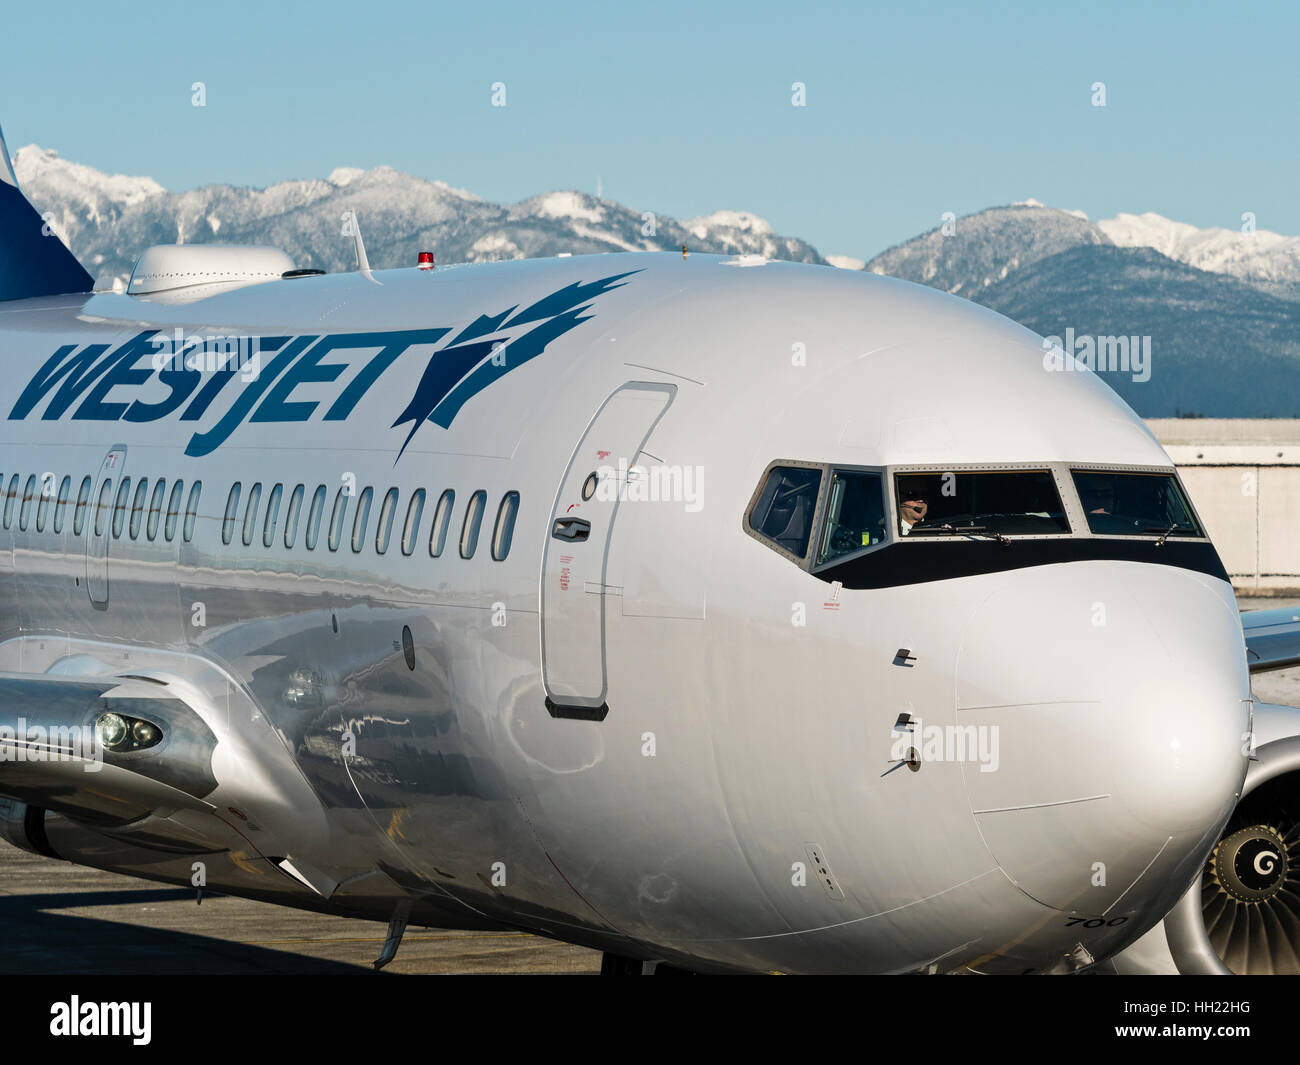 WestJet Airlines plane airplane Boeing 737 (737-700) airliner taxiing along the tarmac, Vancouver International Airport Stock Photo